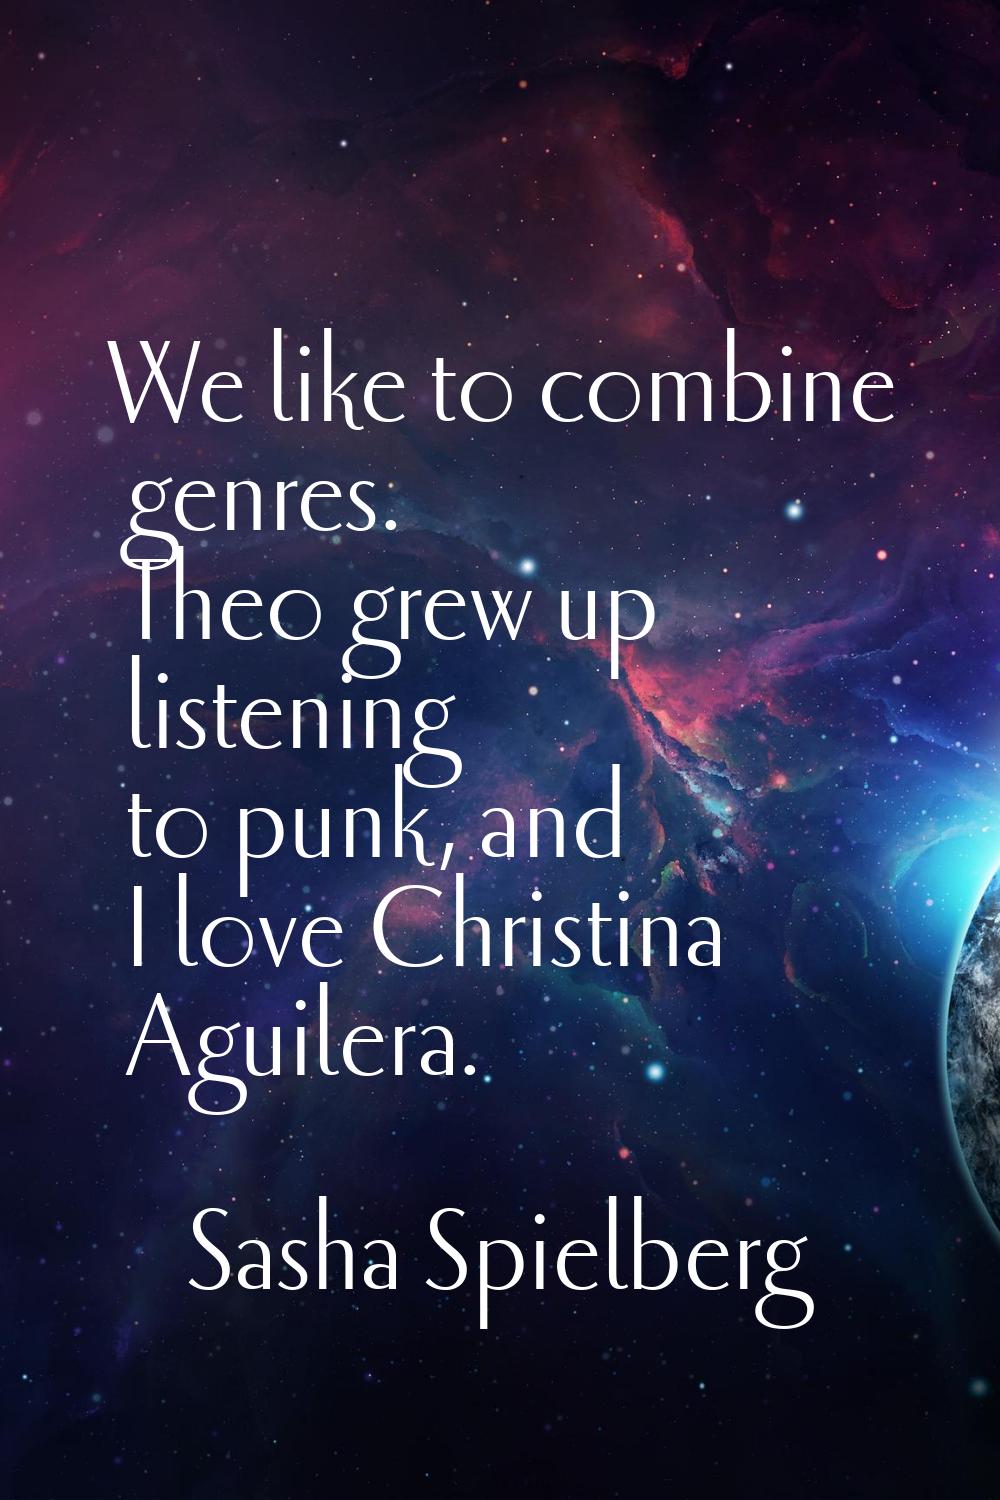 We like to combine genres. Theo grew up listening to punk, and I love Christina Aguilera.